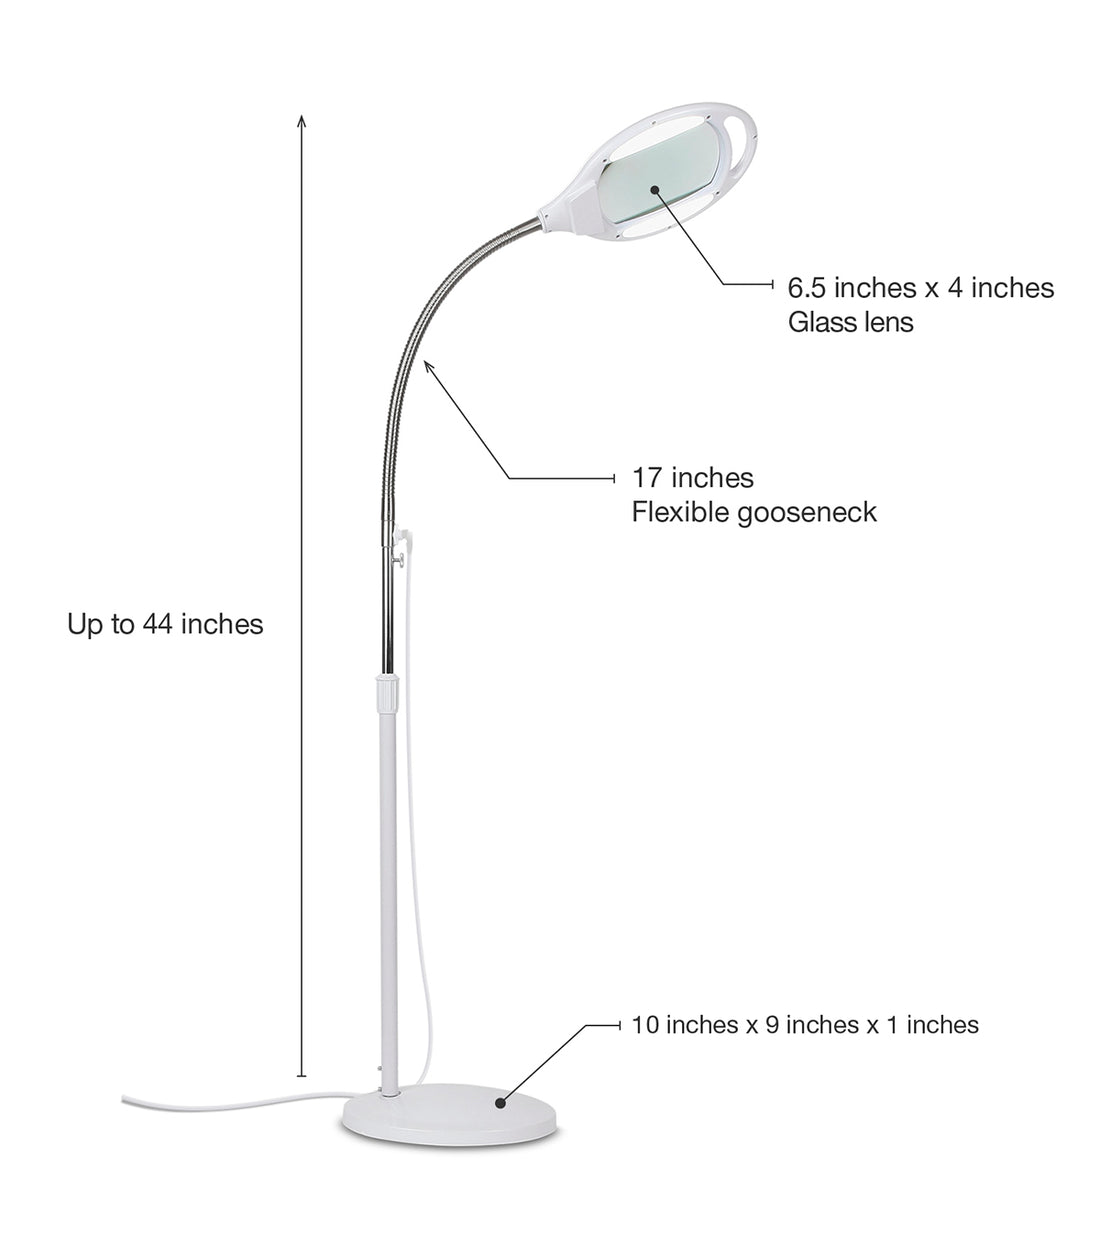 Brightech LightView Pro - Full Page Magnifying Floor Lamp - Hands Free Magnifier with Bright LED Light for Reading - Flexible Gooseneck Holds Position - Standing Mag Lamp